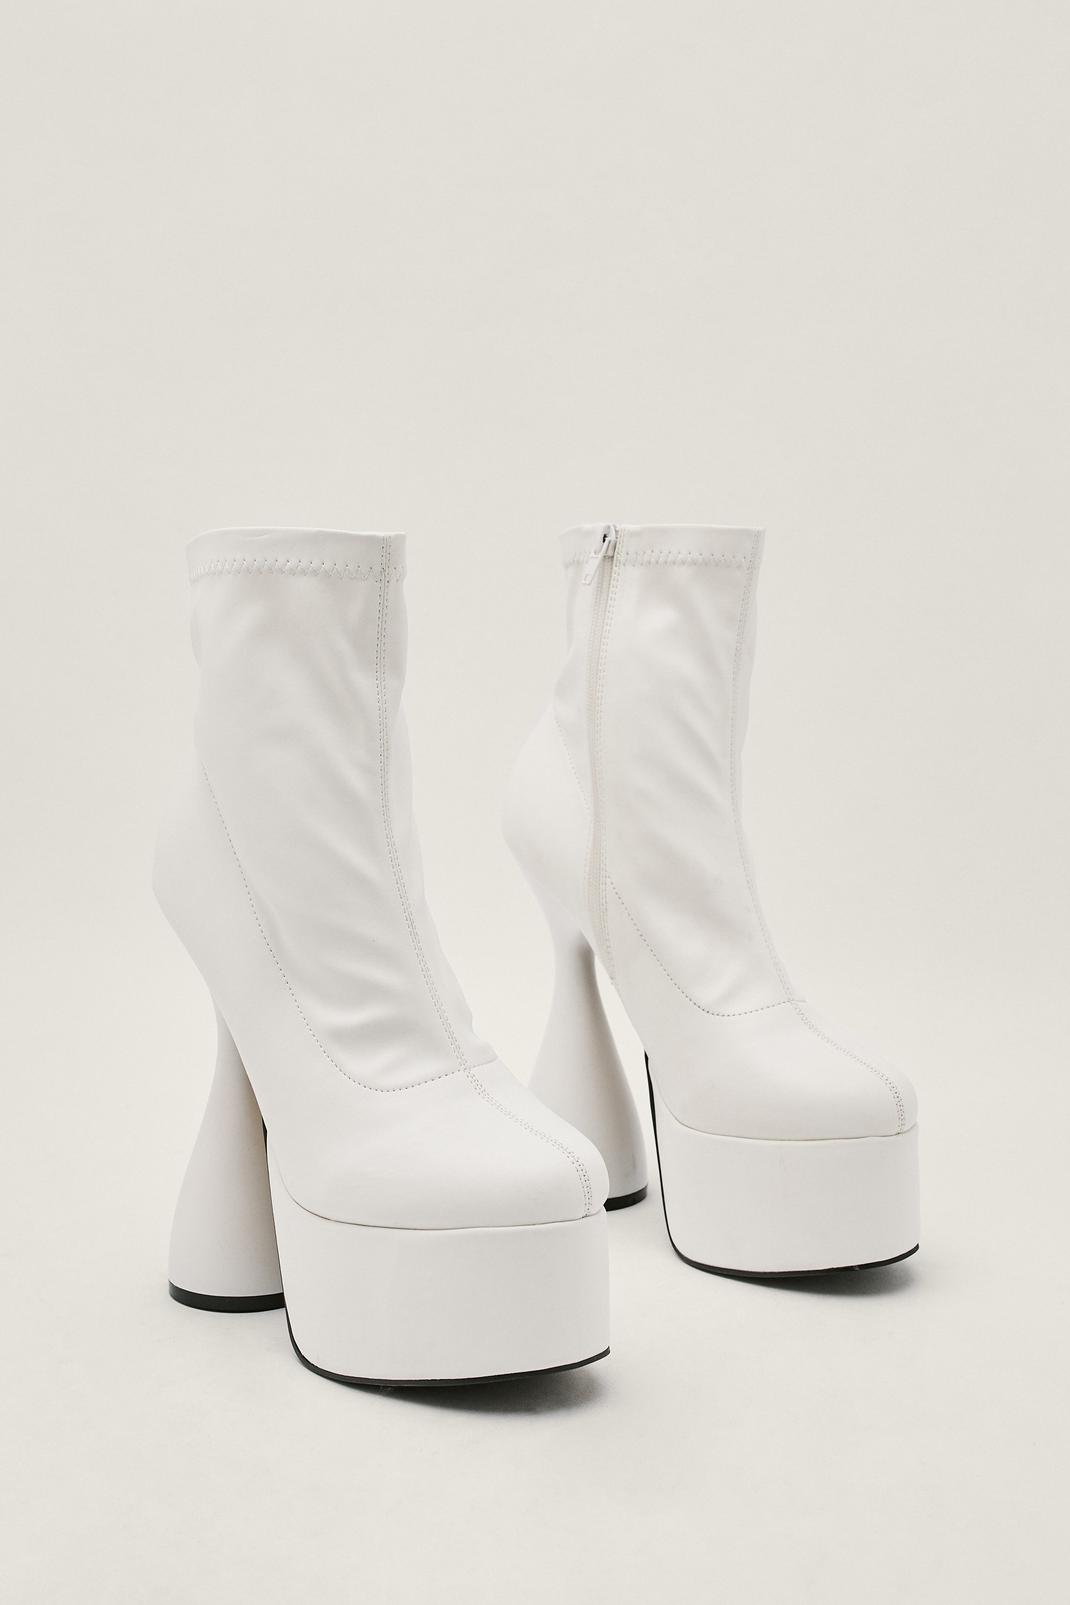 White Faux Leather Spool Heel Platform Sock Boots image number 1